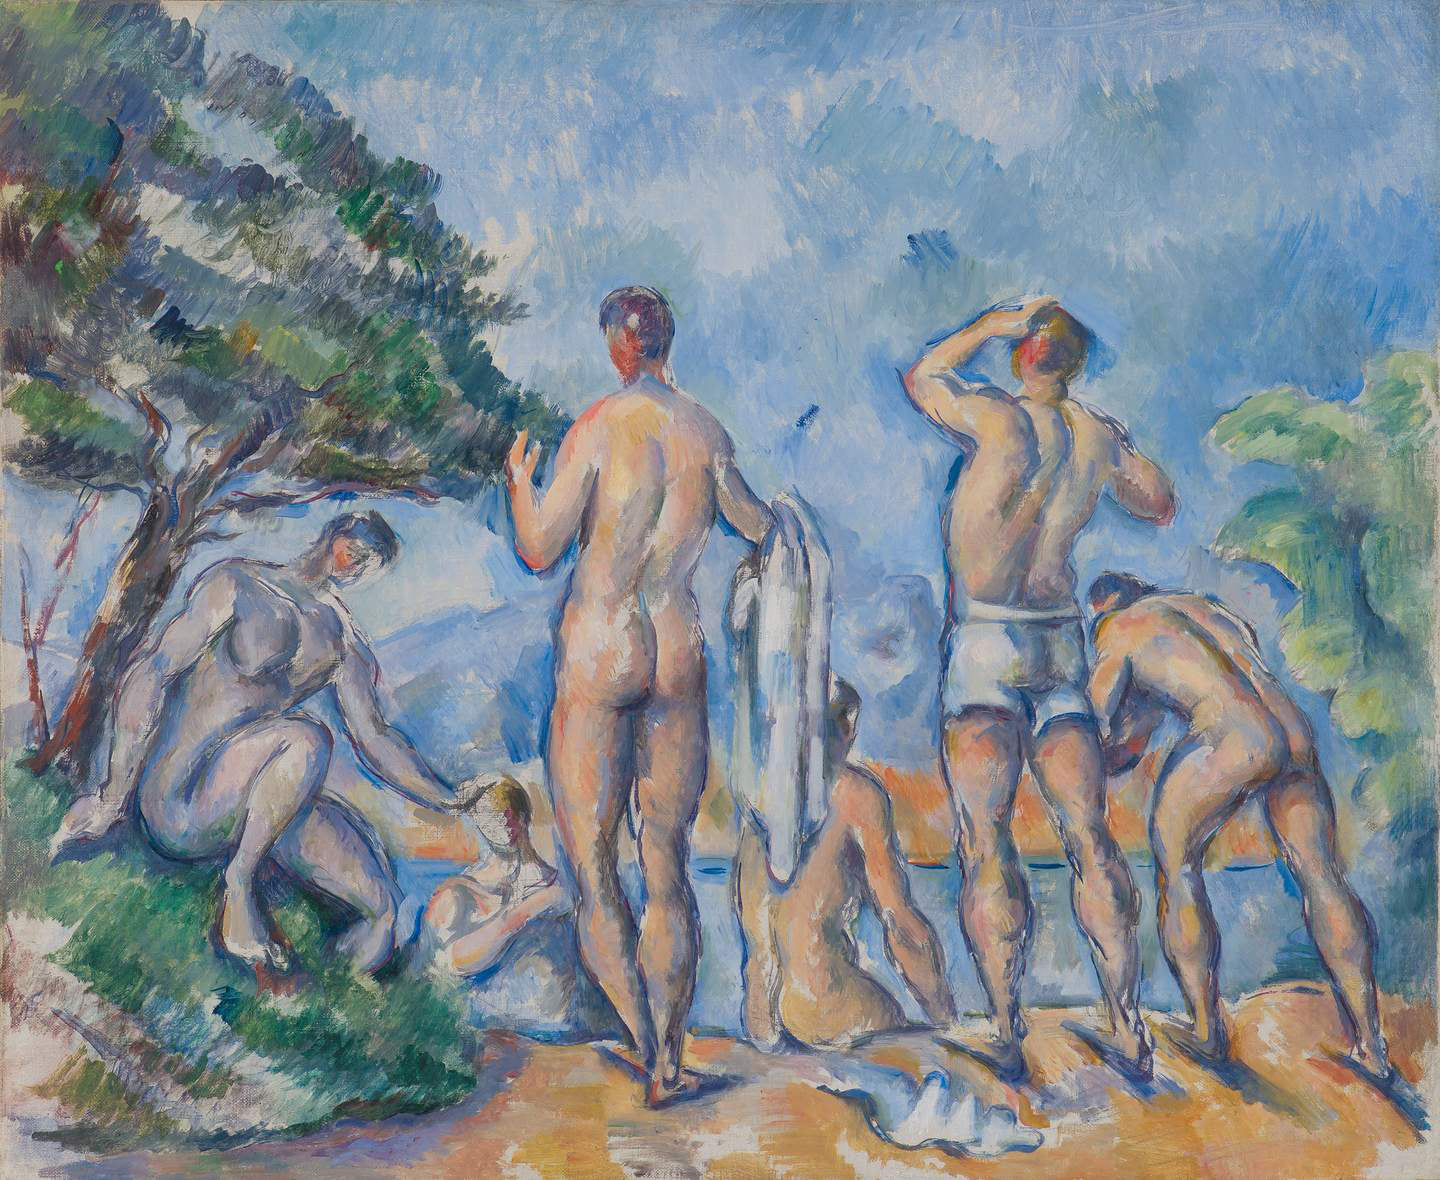 Paul Cézanne Puzzle - Recreate the serenity of plein air painting with the Bathers in their natural setting.